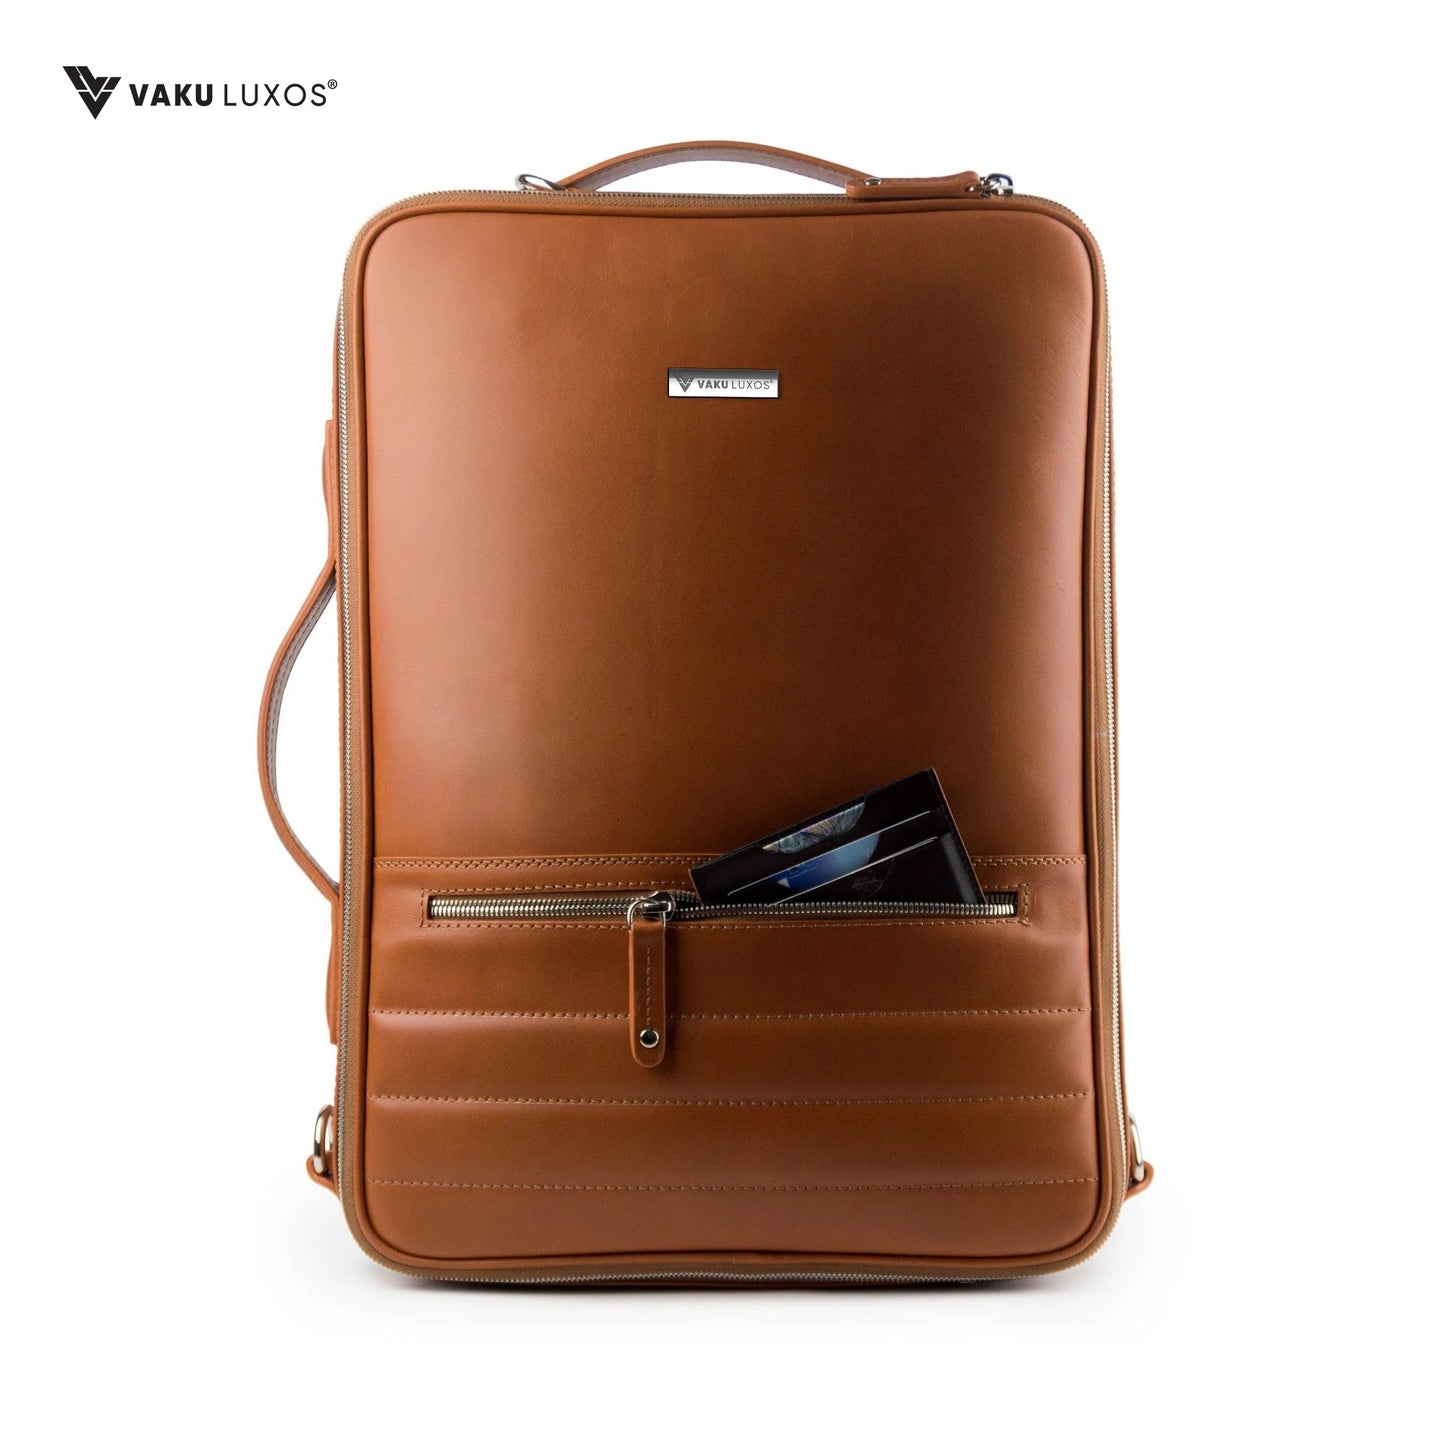 vaku-luxos®-barcelona-premium-collection-sleeve-for-macbook-13-14-with-strap-highly-durable-camel8905129016784